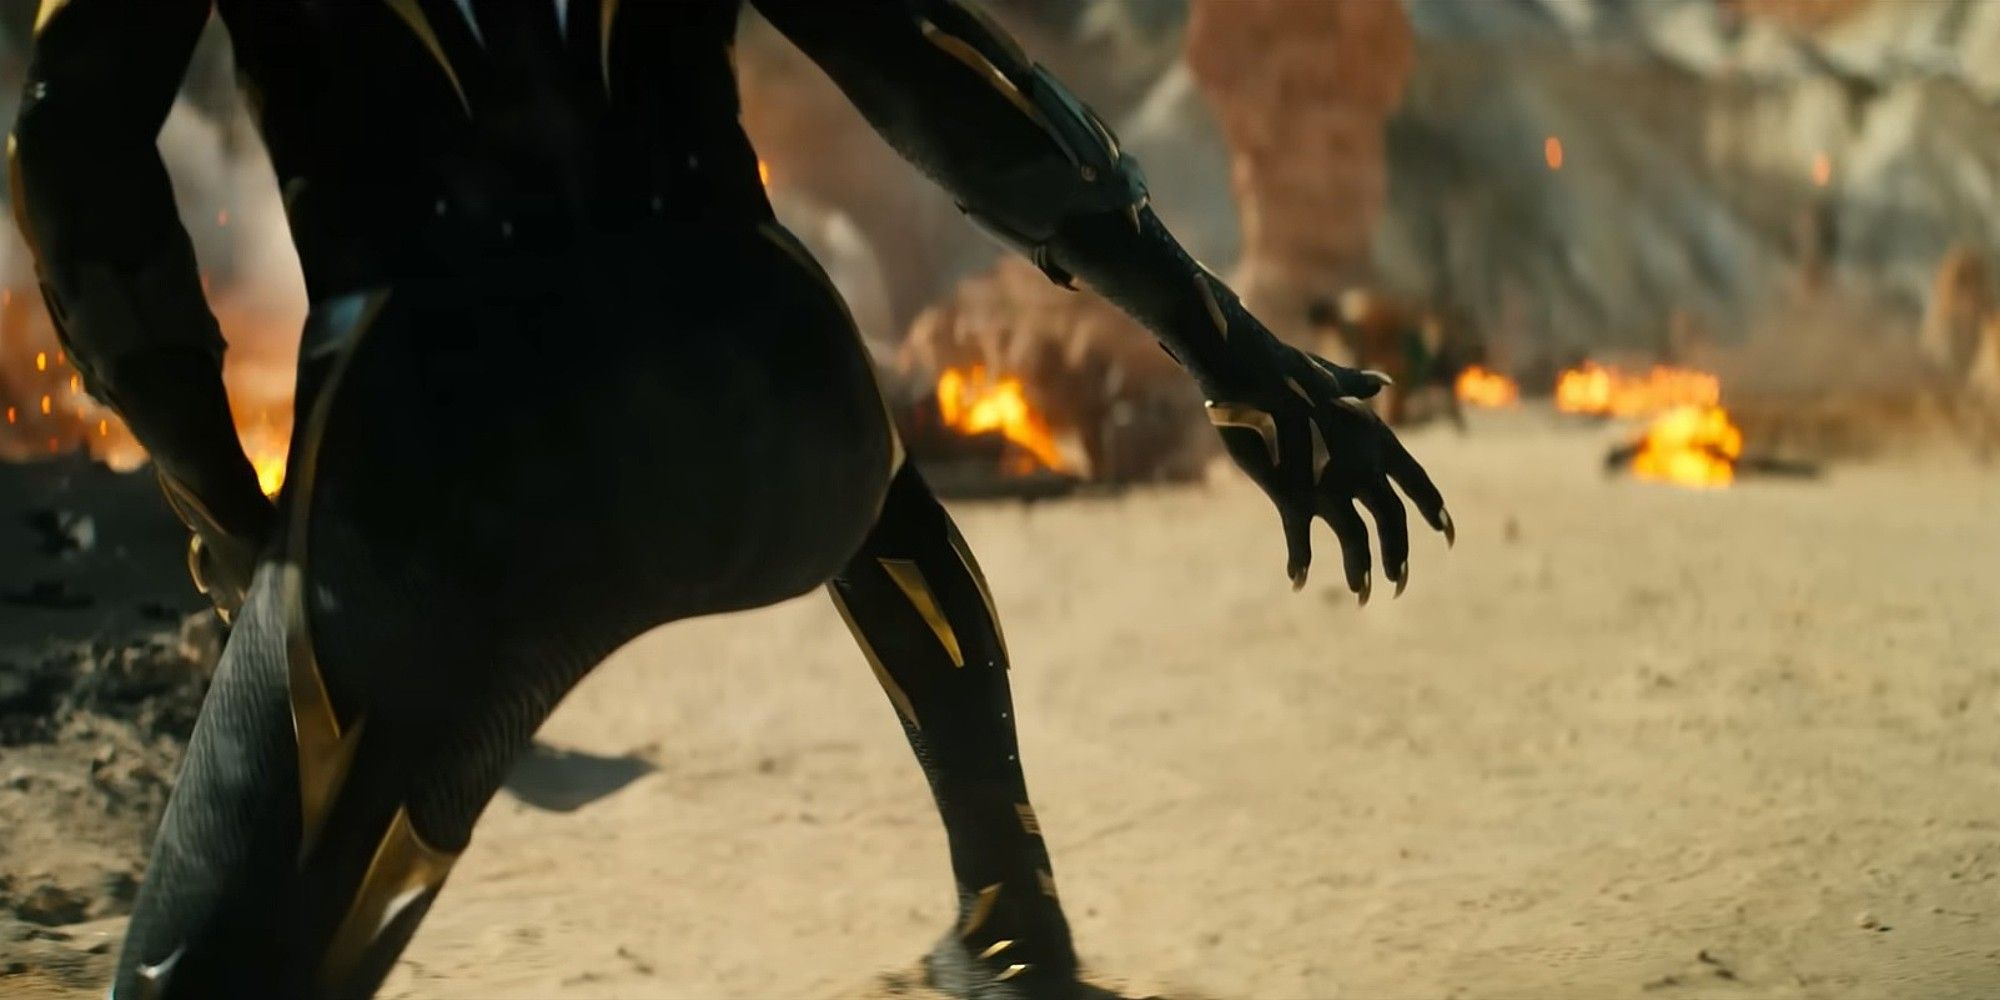 Black Panther Wakanda Forever, Shuri with Black Panther claws